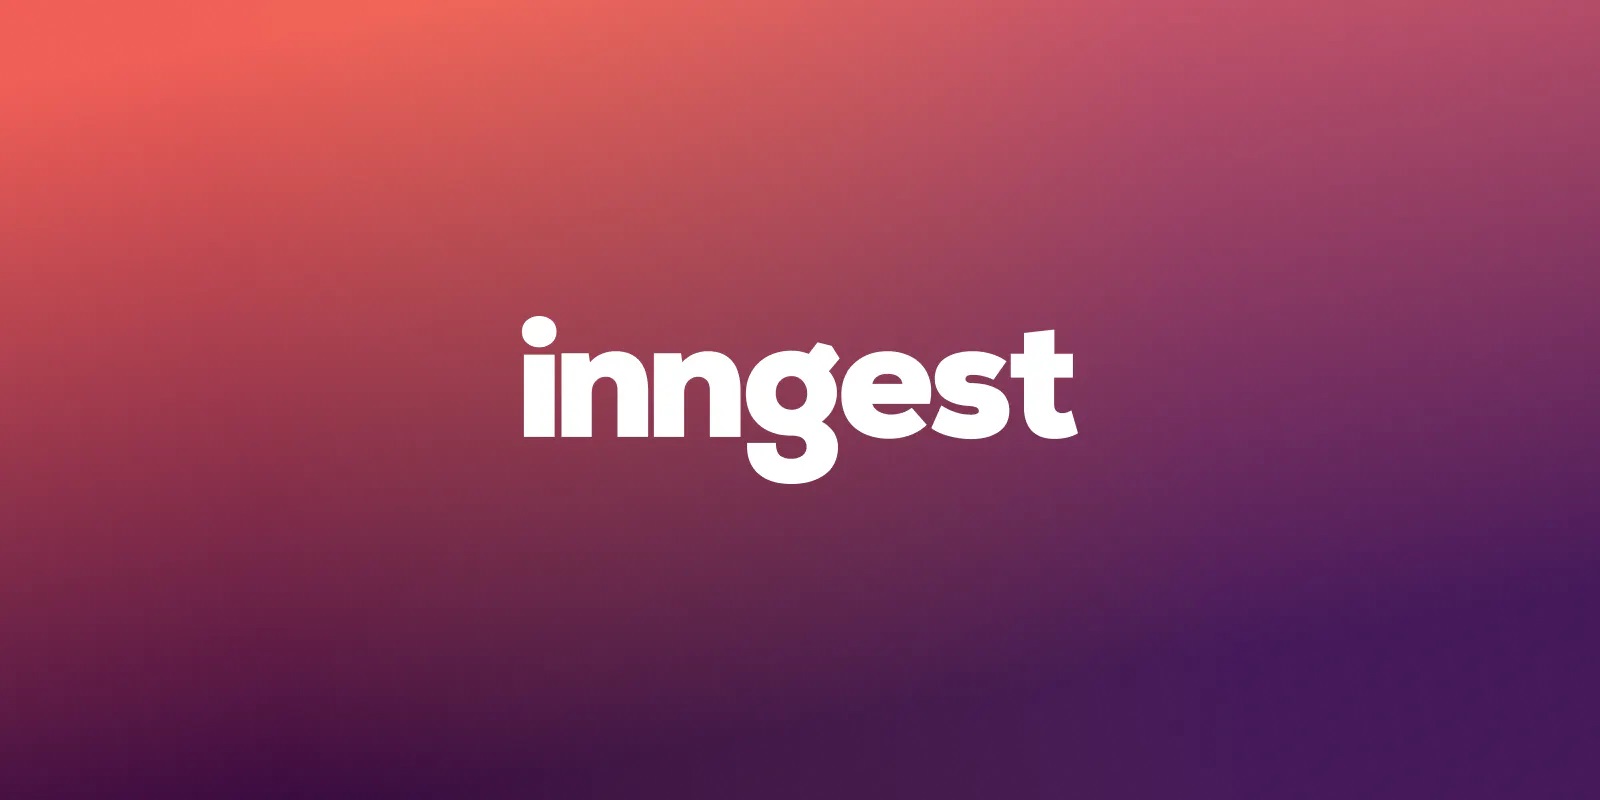 inngest-secures-6-1m-in-funding-to-expand-workflow-engine